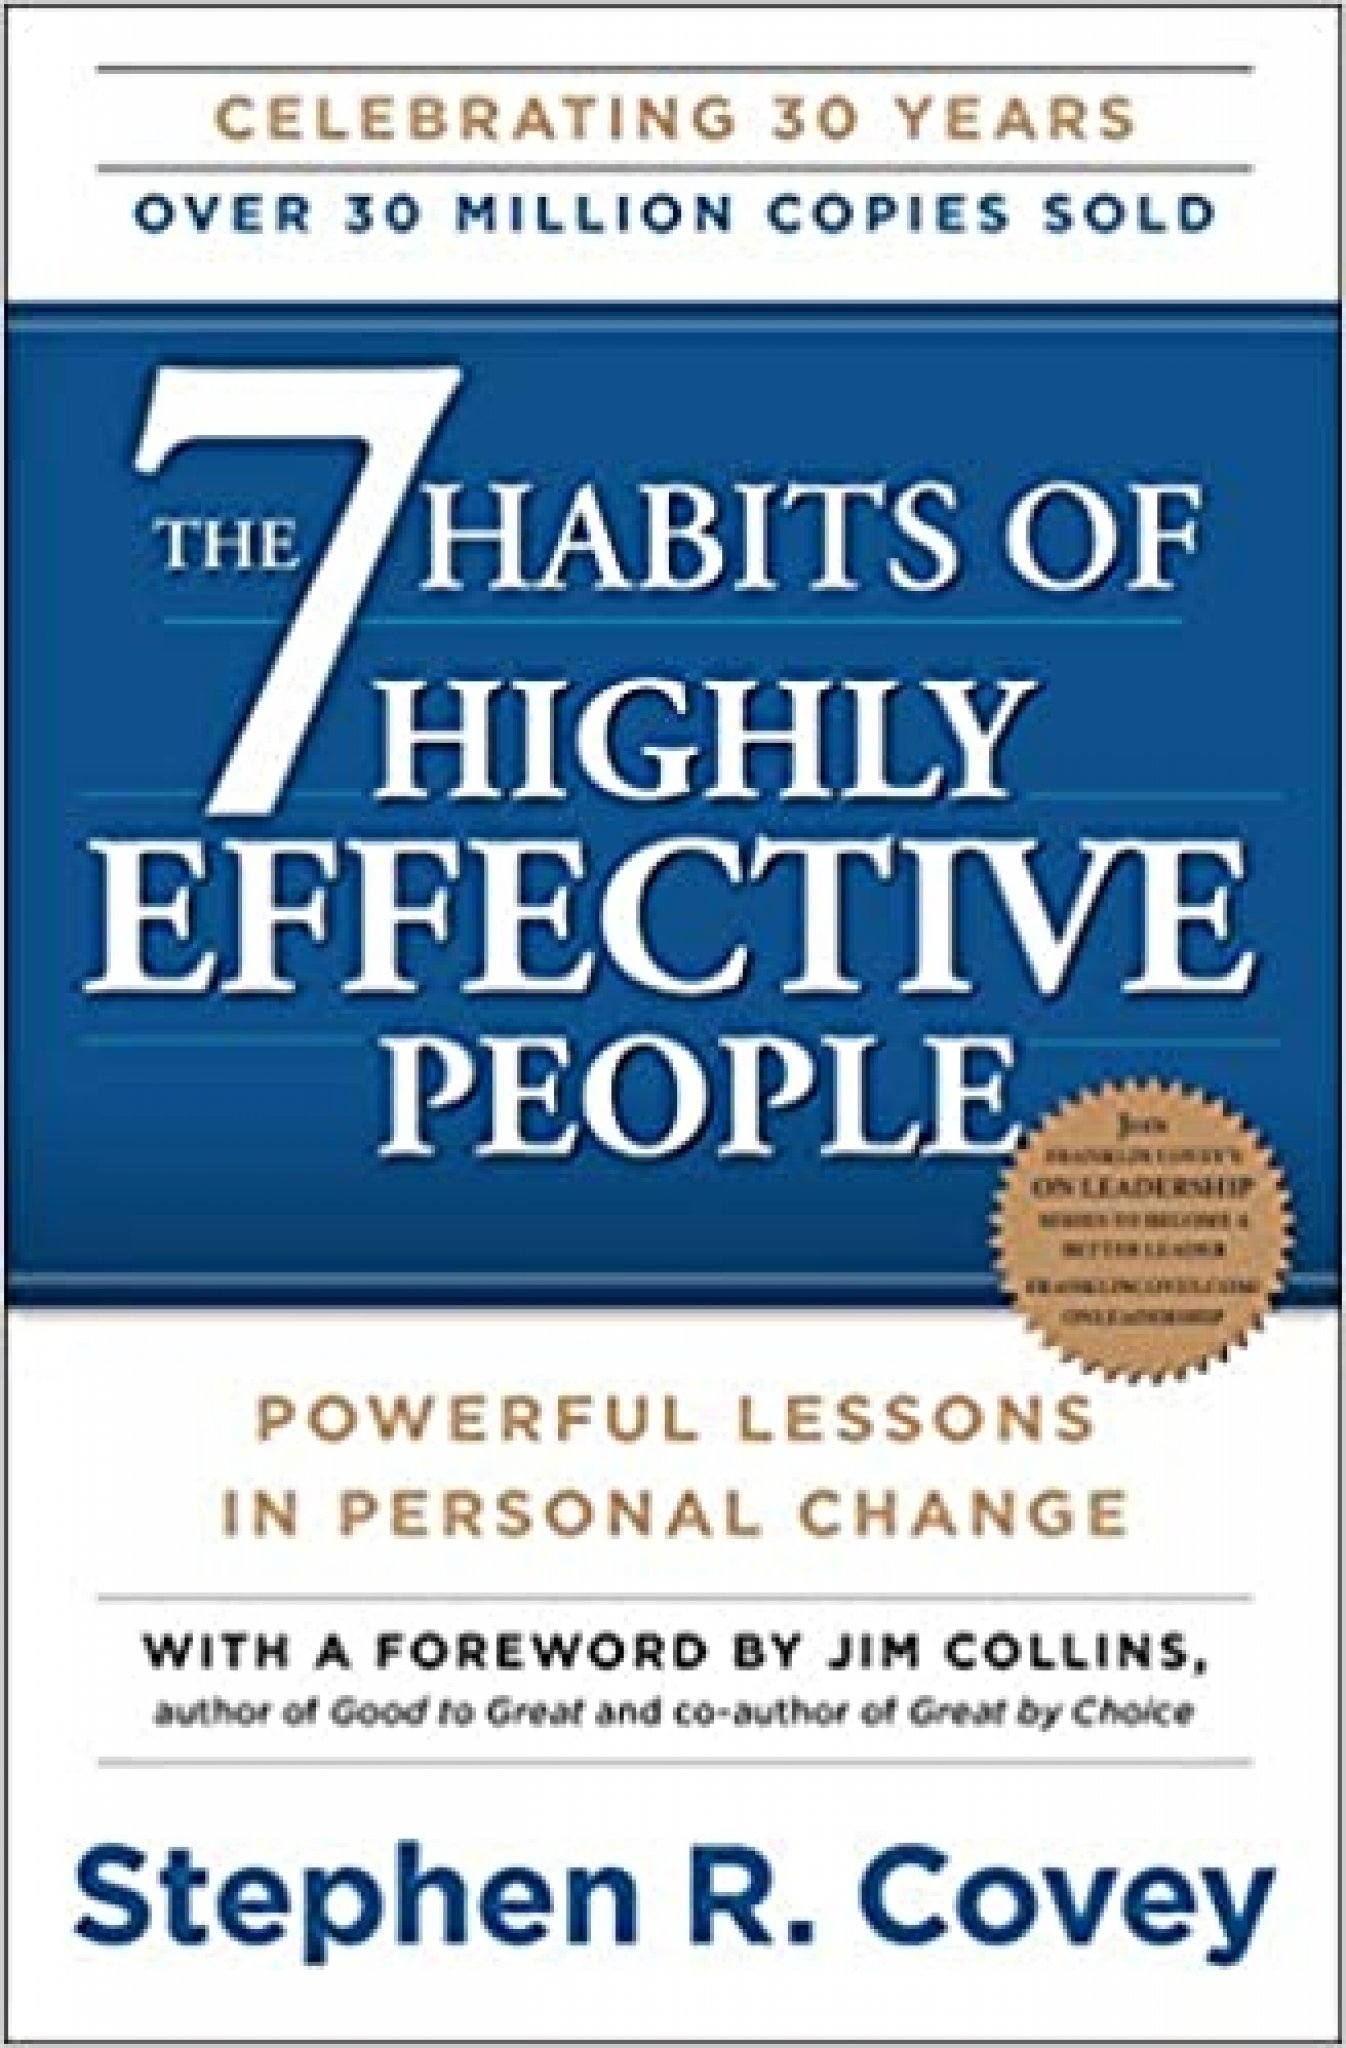 stephen covey 7 habits of highly effective leaders